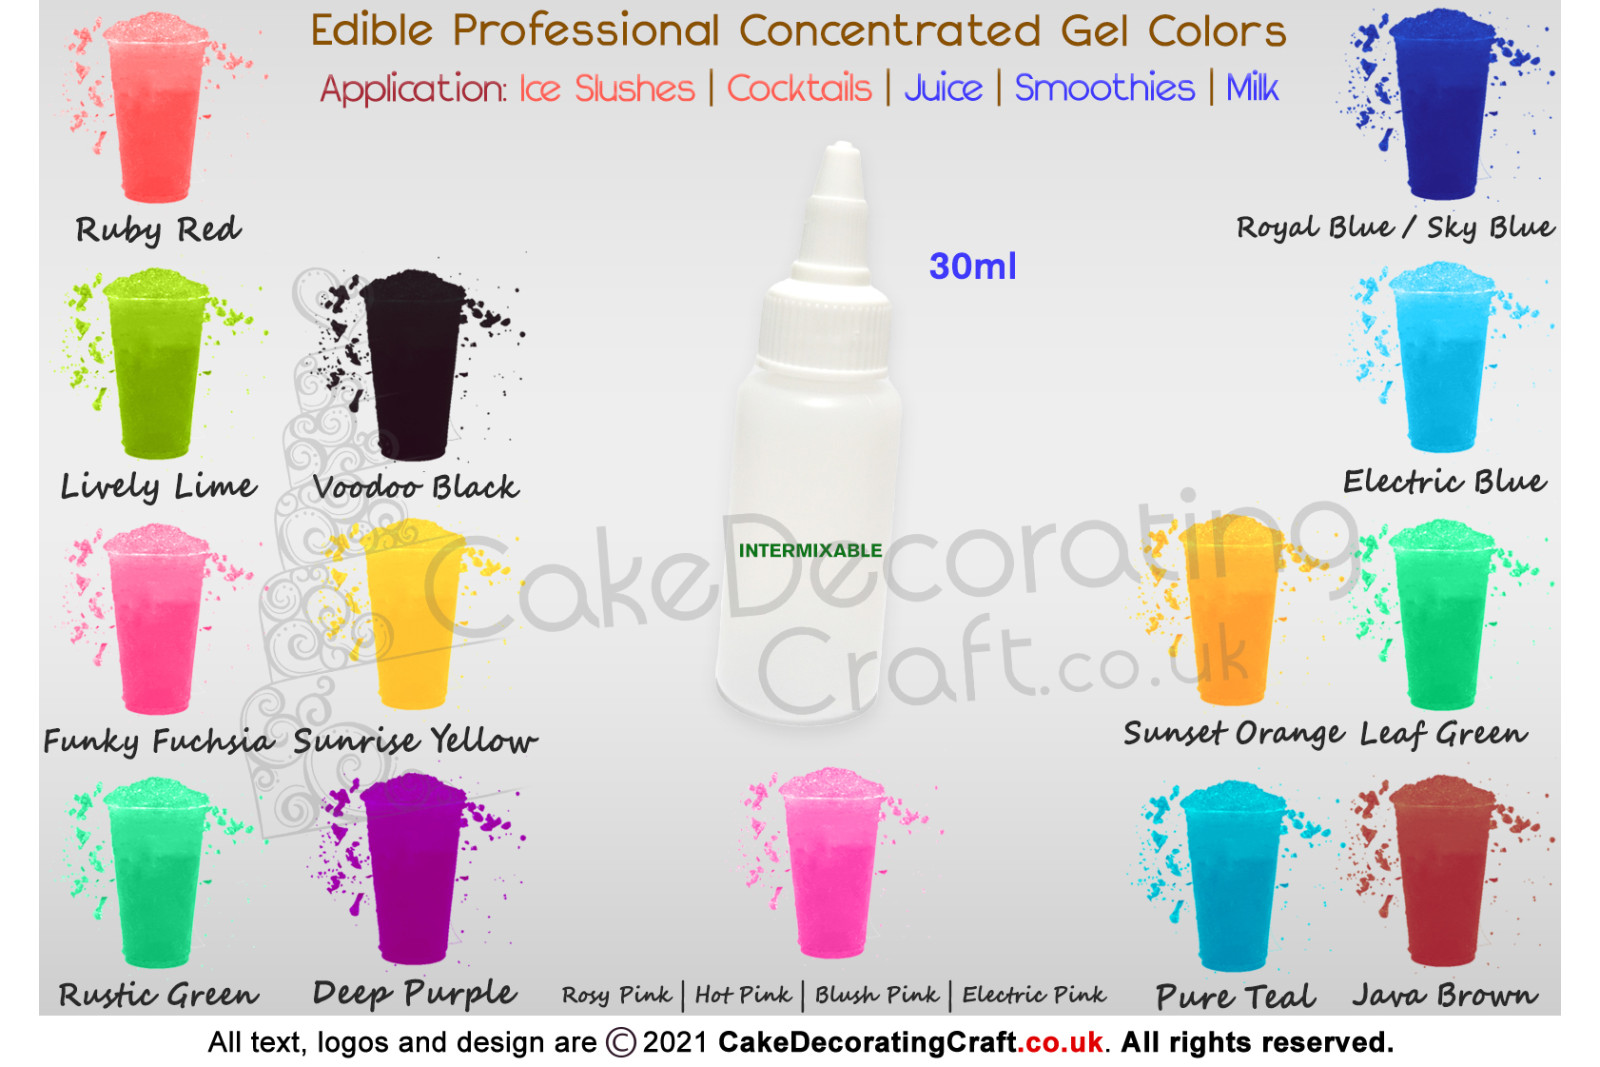 Ice Slush Mocktails Cocktail Drinks Fun Pro Gel Food Colour Edible Concentrated